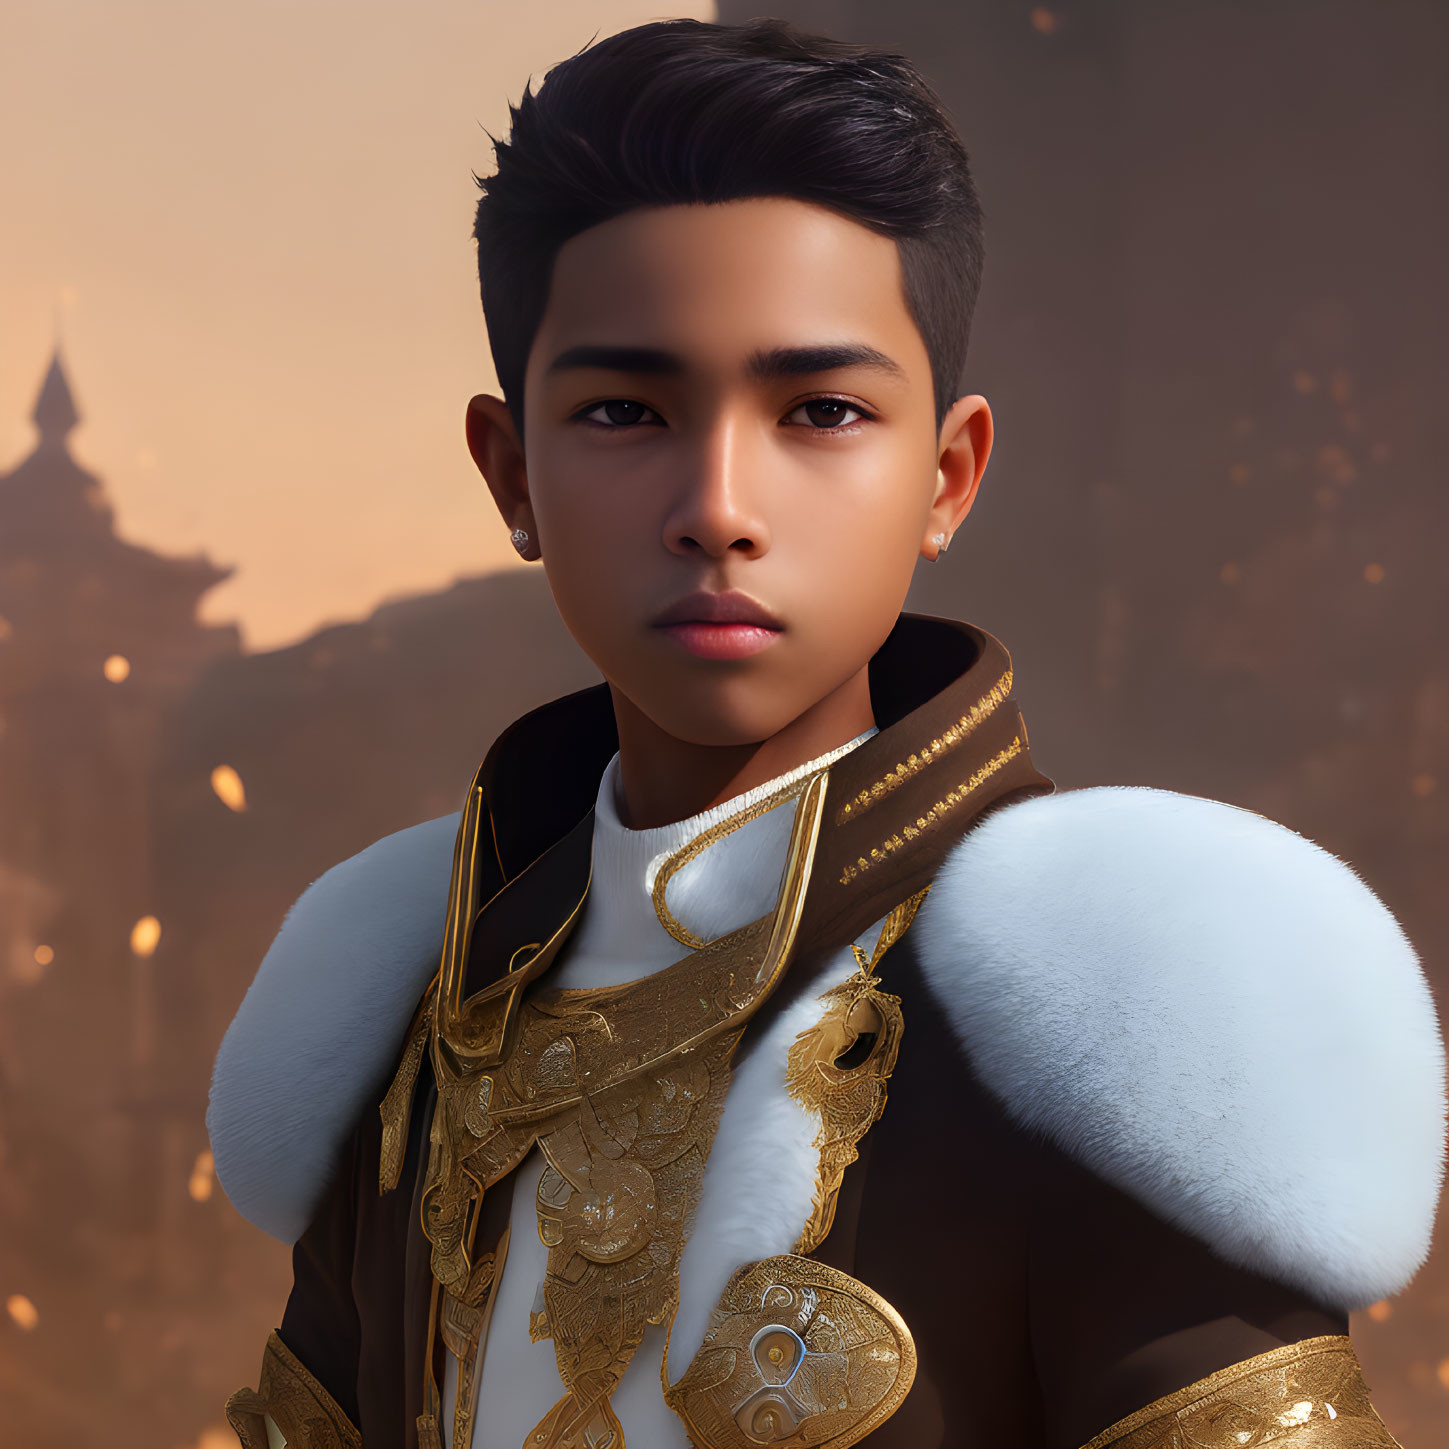 Young man in golden armor with slicked-back hair on amber backdrop